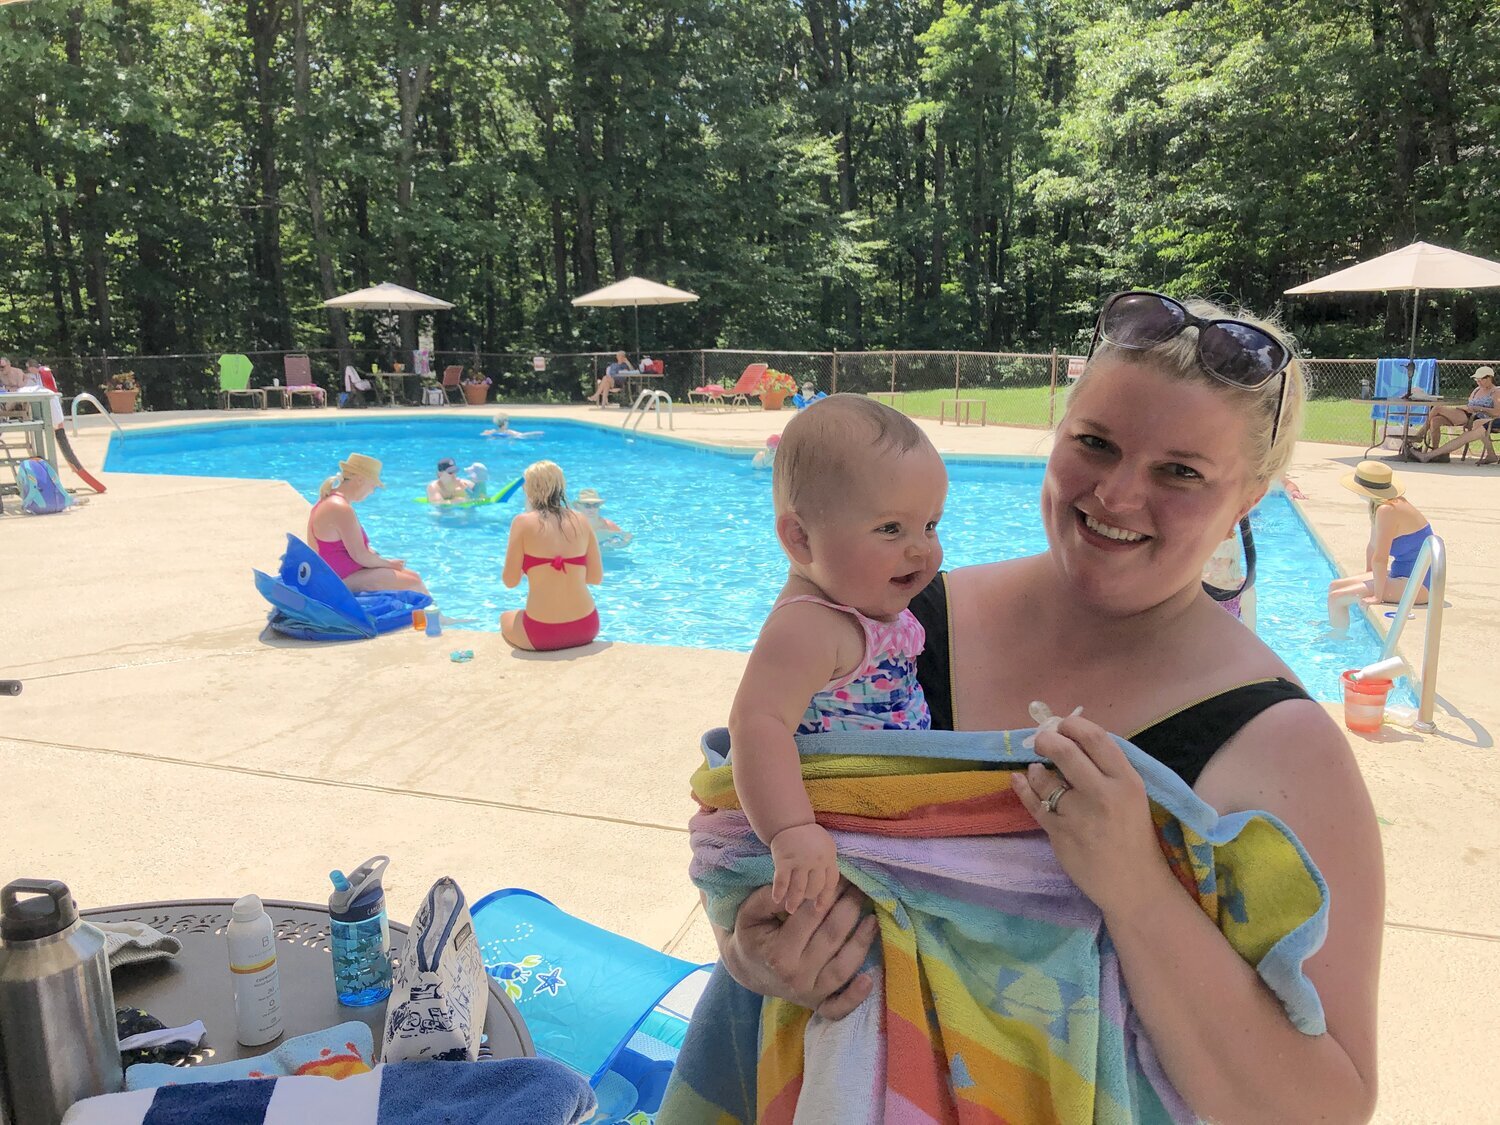   To escape the summer heat at their home in Richmond, Wintergreen Property Owner Kristen Cary and her daughter, Campbell, visited the    mountain’s Chestnut Springs pool   .  